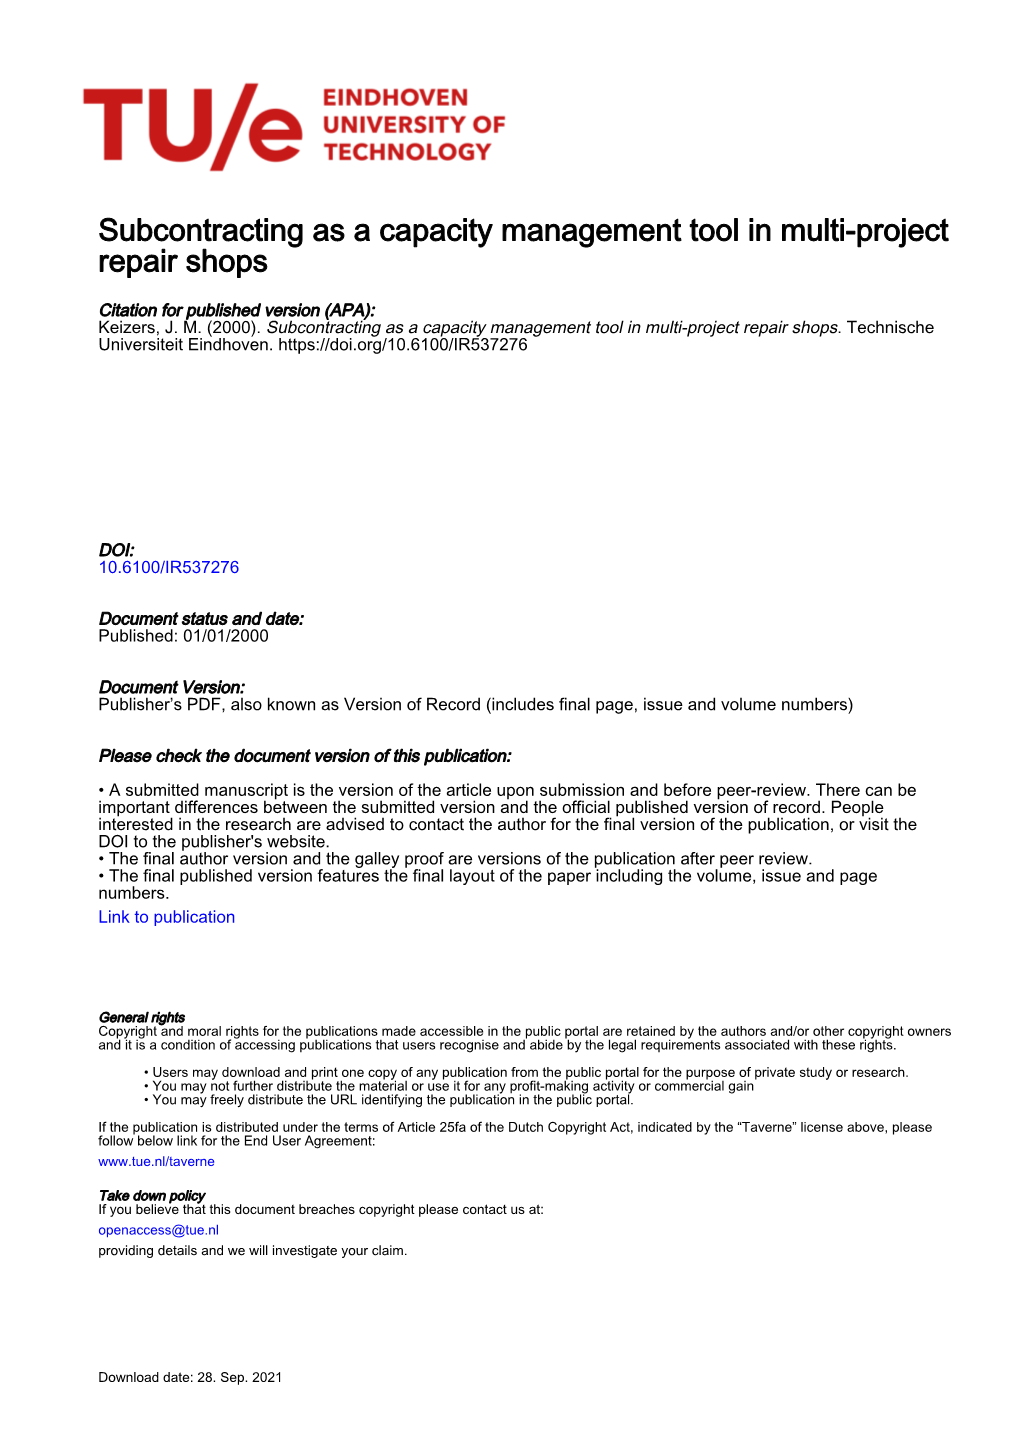 Subcontracting As a Capacity Management Tool in Multi-Project Repair Shops